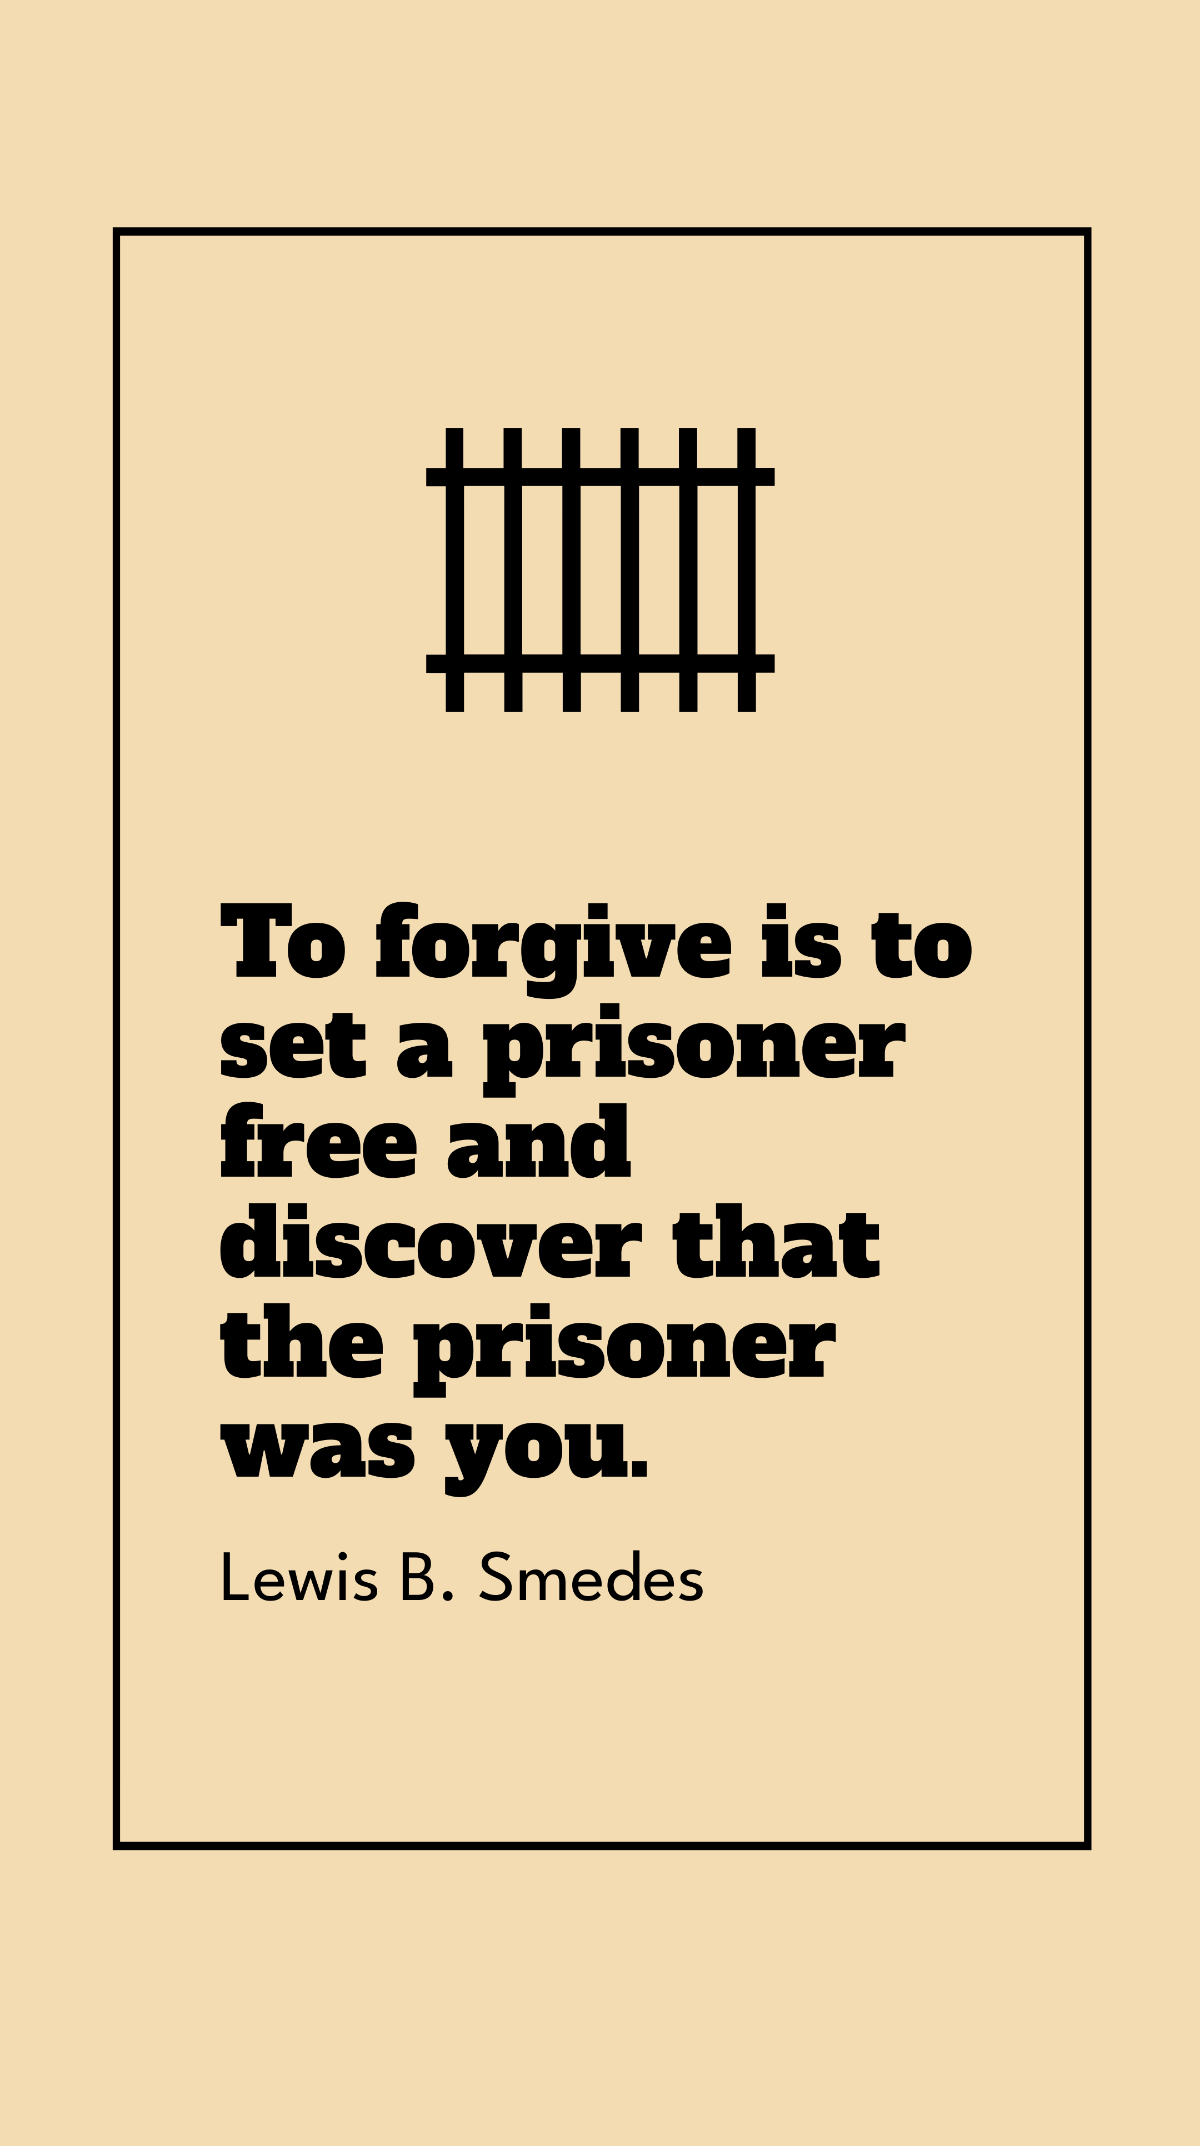 Lewis B. Smedes - To forgive is to set a prisoner and discover that the prisoner was you.